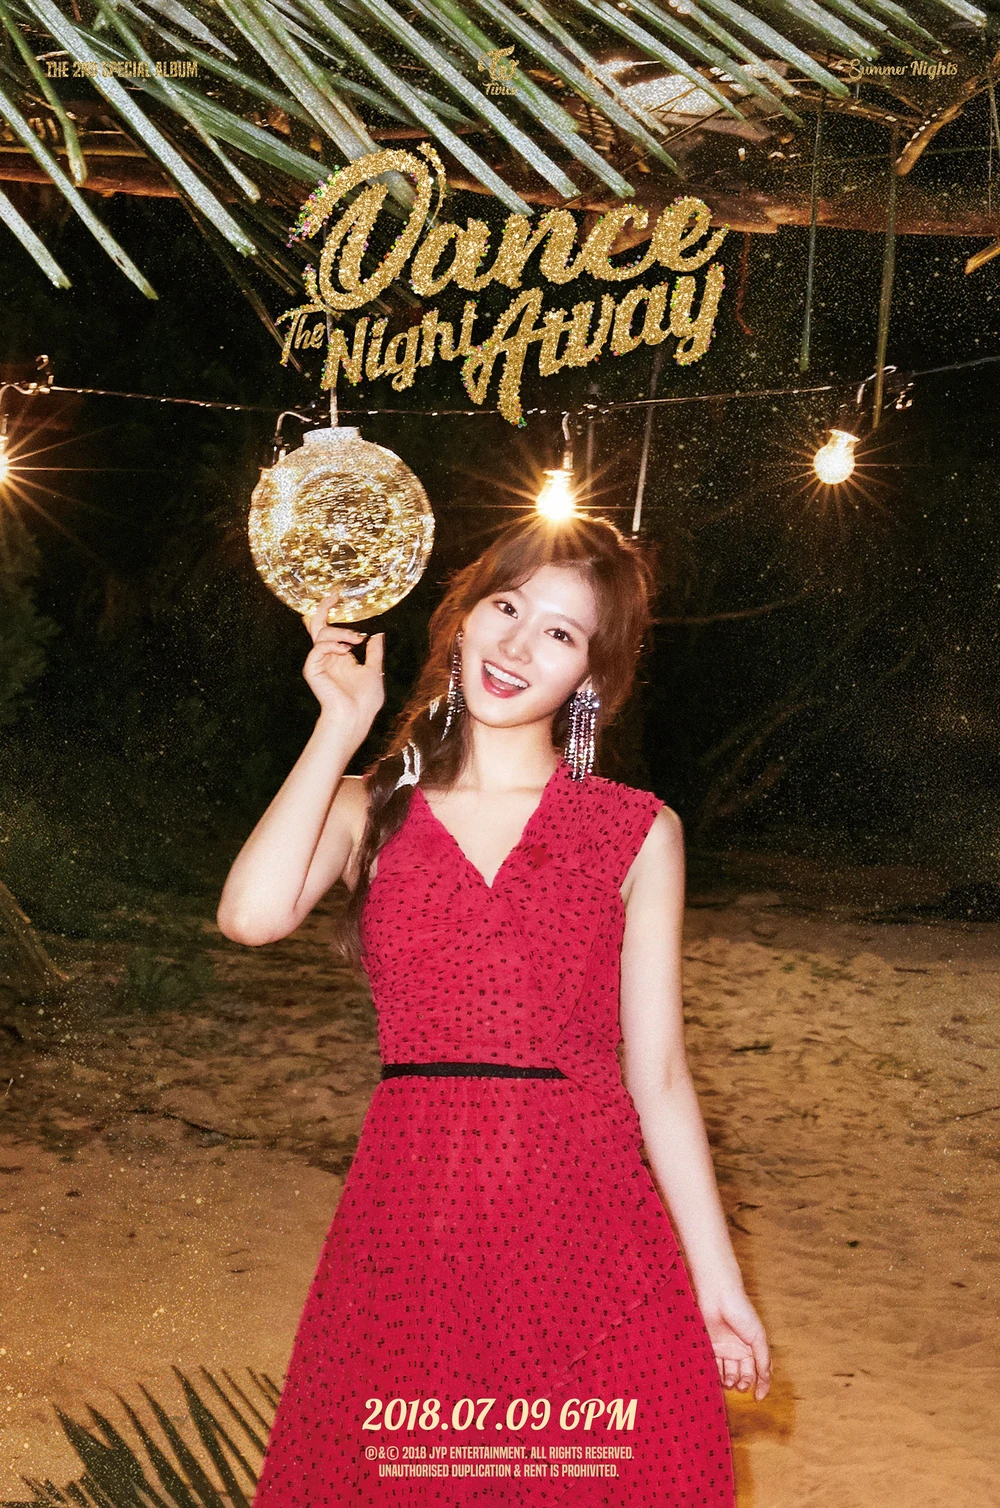 Twice Summer Nights Sana Concept Teaser Picture Image Photo Kpop K-Concept 1